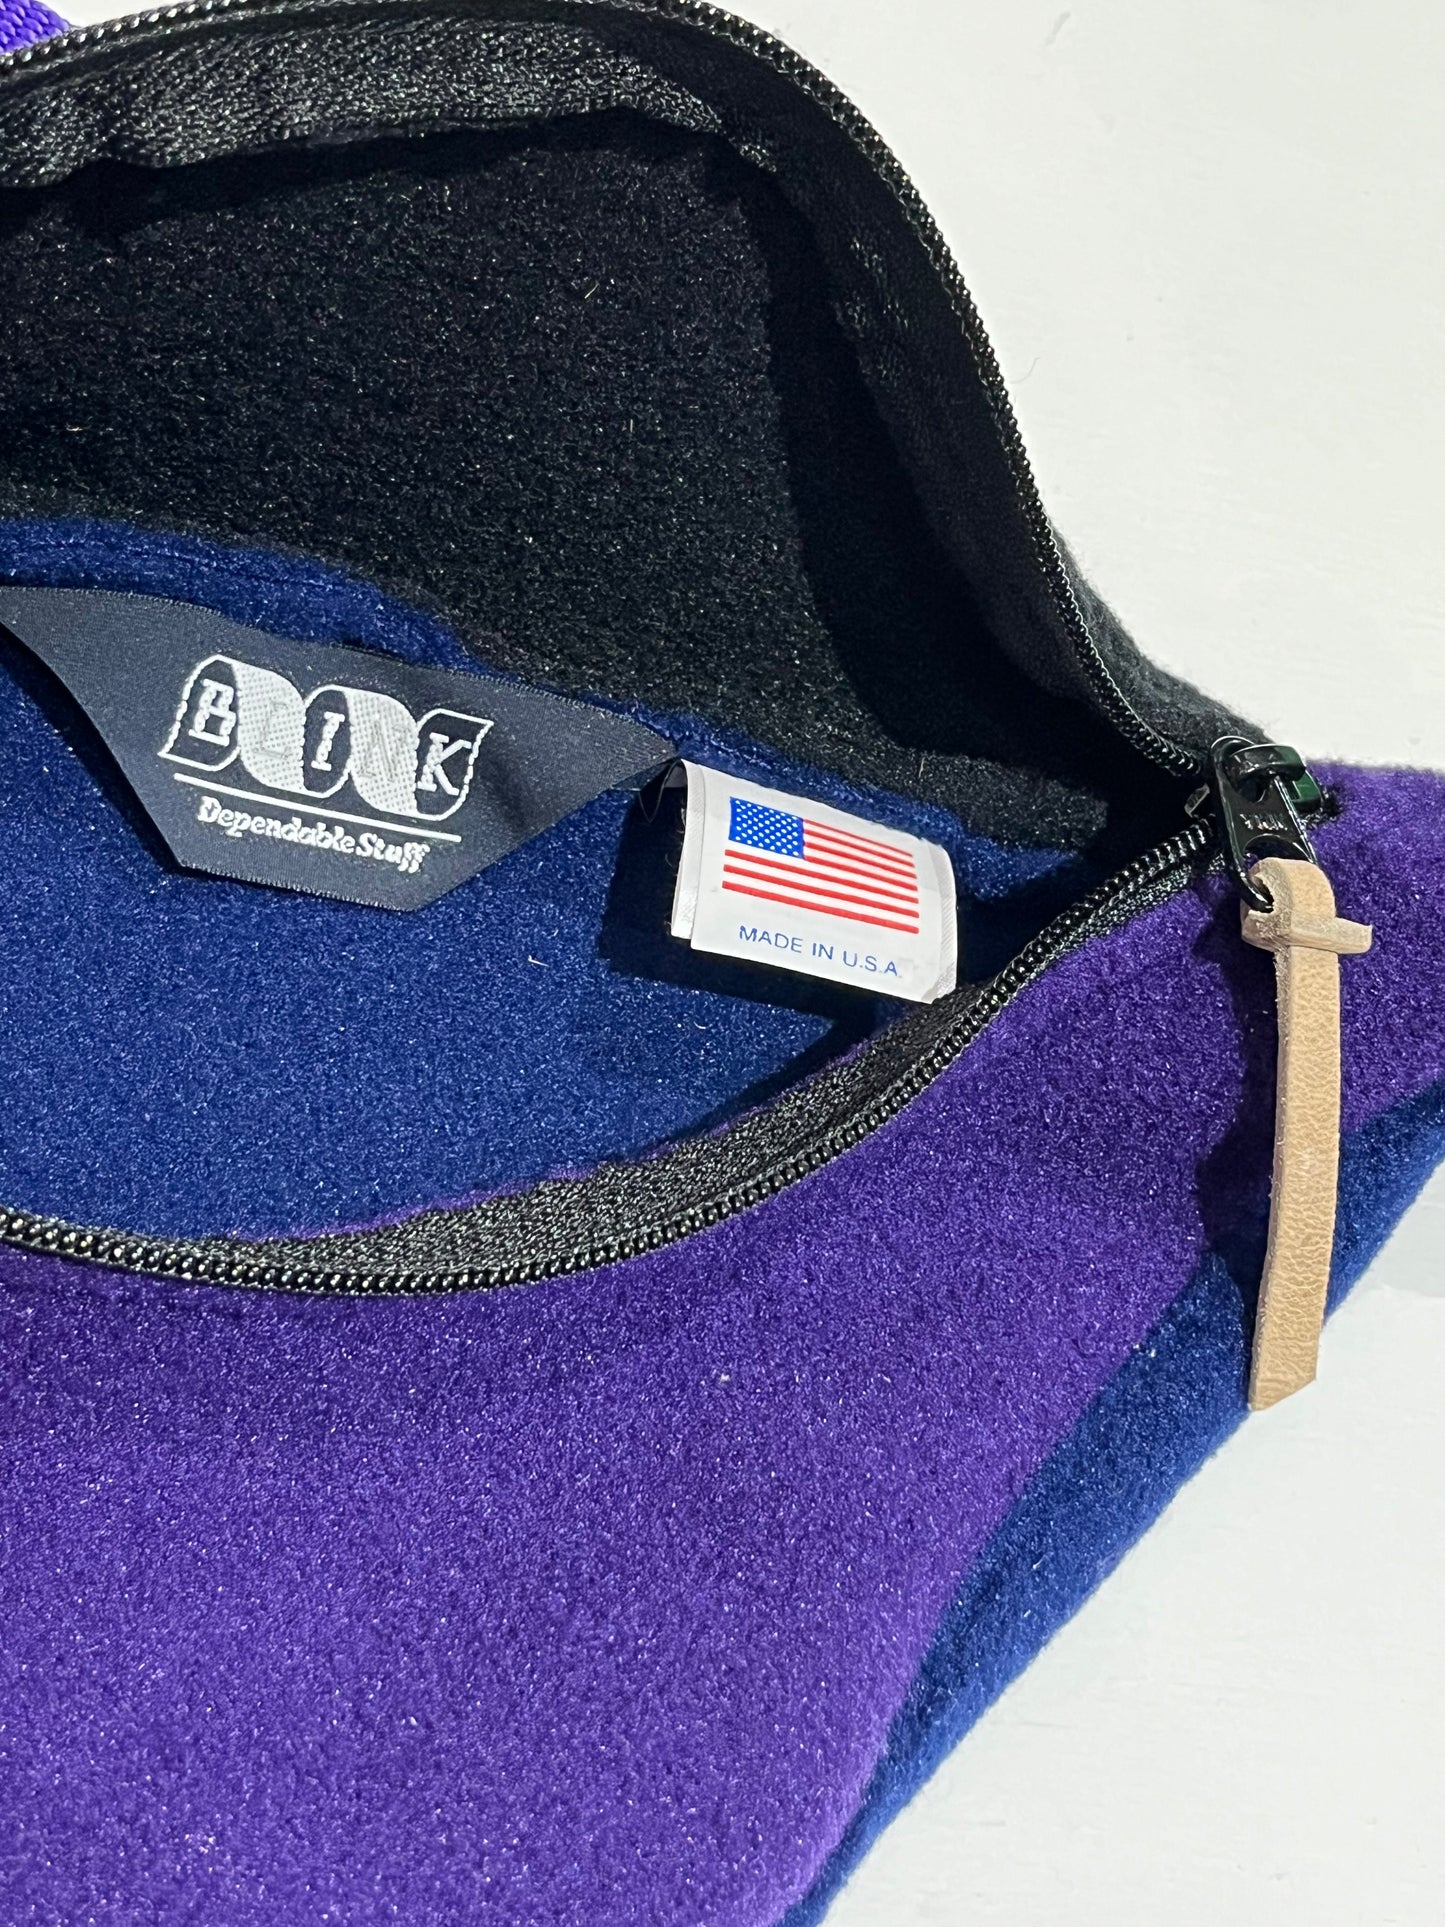 [ BLINK ] POLARTEC FANNY PACK MADE IN USA